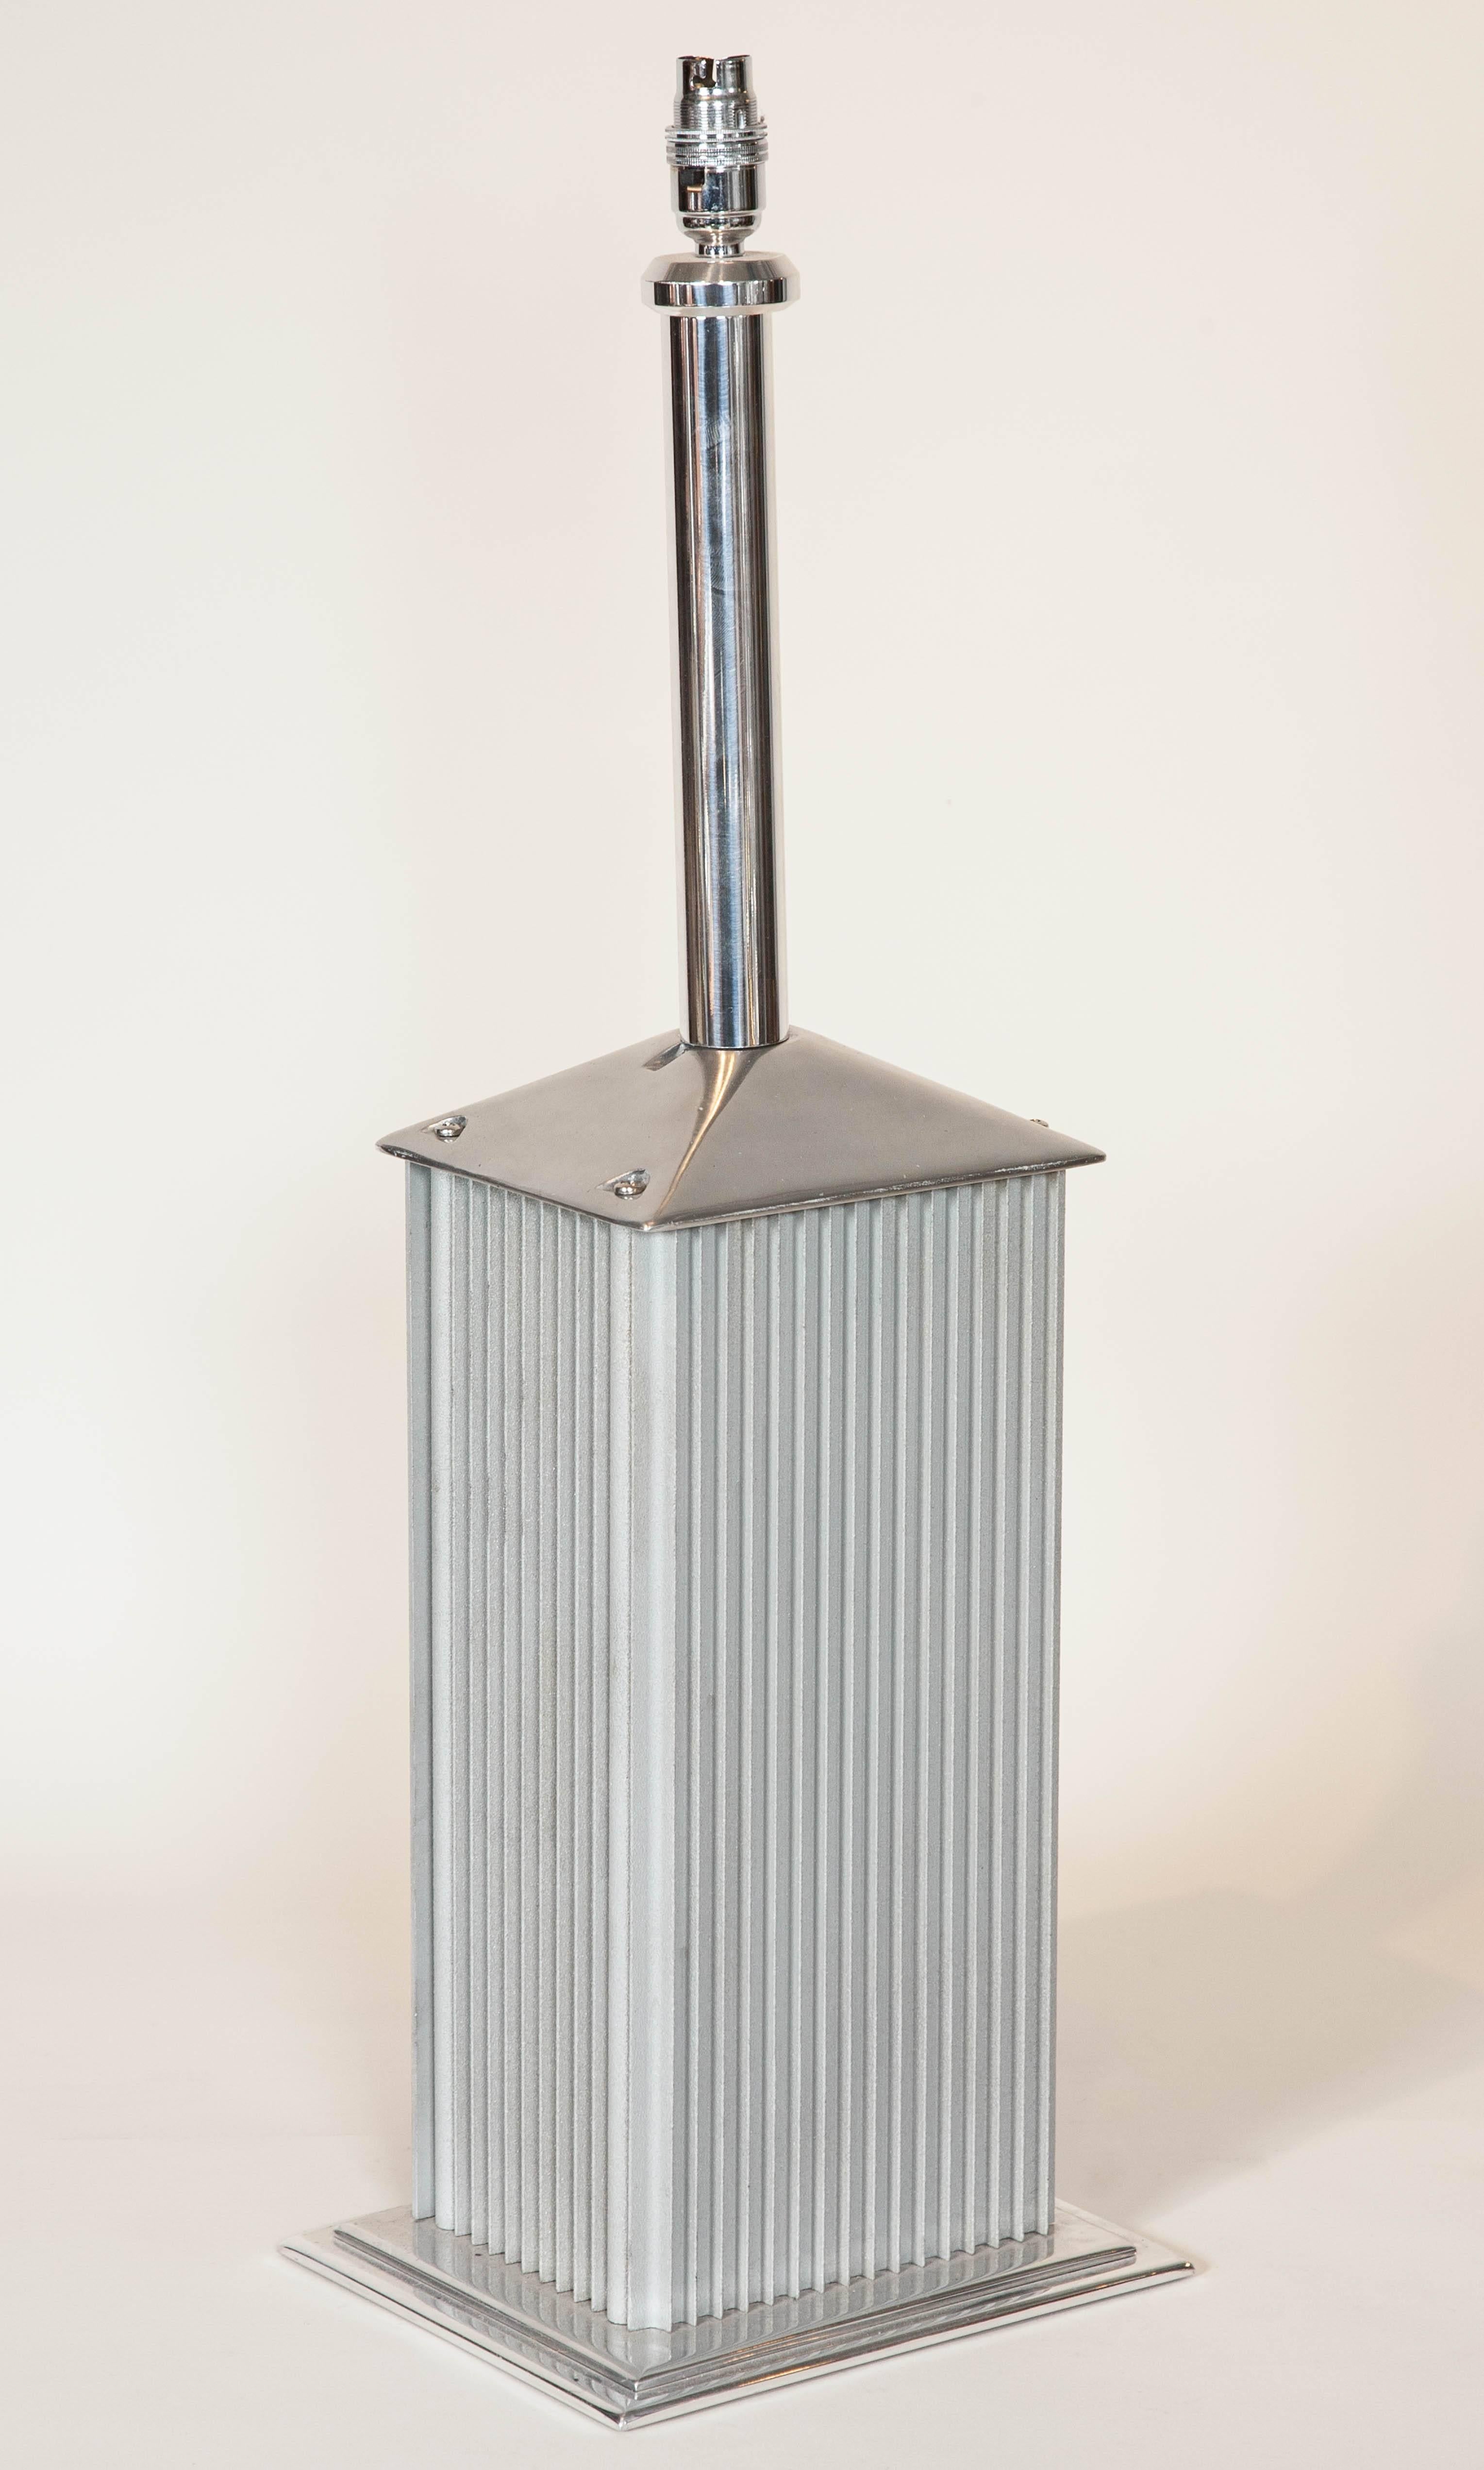 Table lamps constructed from Industrial transformer cases from Holophane lights.

Sold as pairs, but can sell as singles or in larger amounts.

Measures: Height of small size: 25 inches - 64 cm.

Height of large size: 28 1/4 inches - 72 cm.